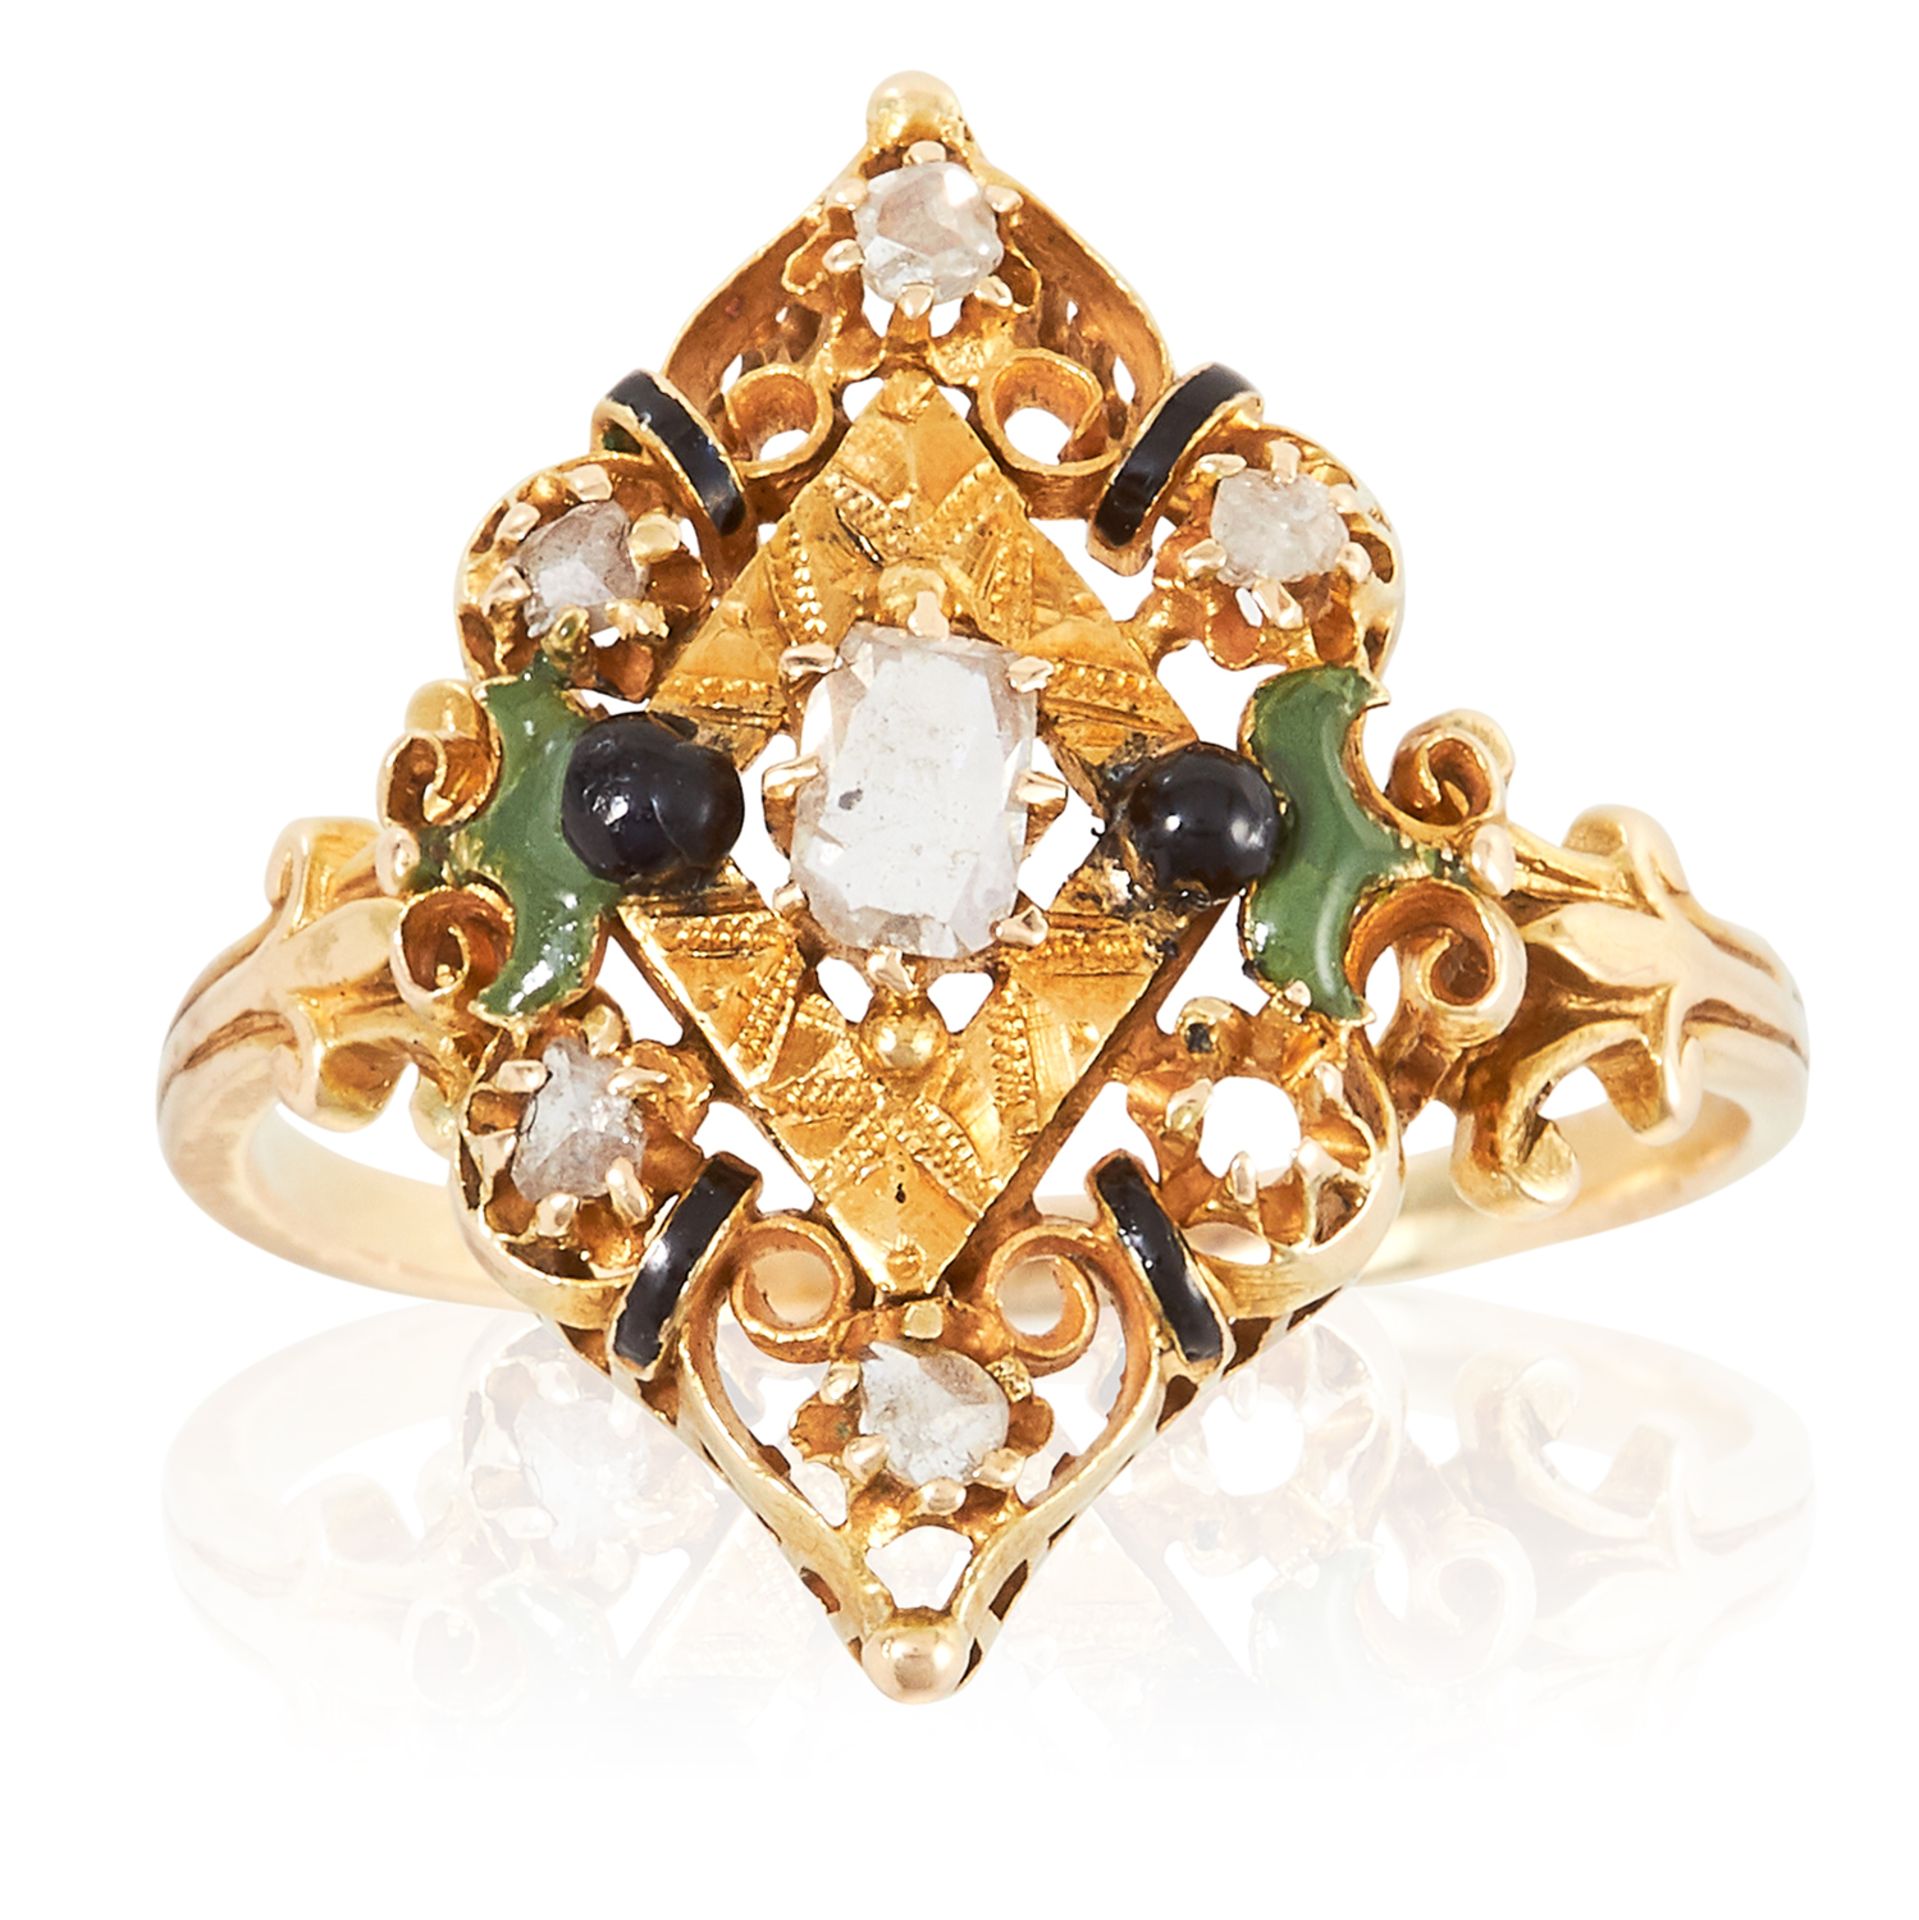 AN ANTIQUE DIAMOND AND ENAMEL RING in high carat yellow gold, the marquise face with scrolling